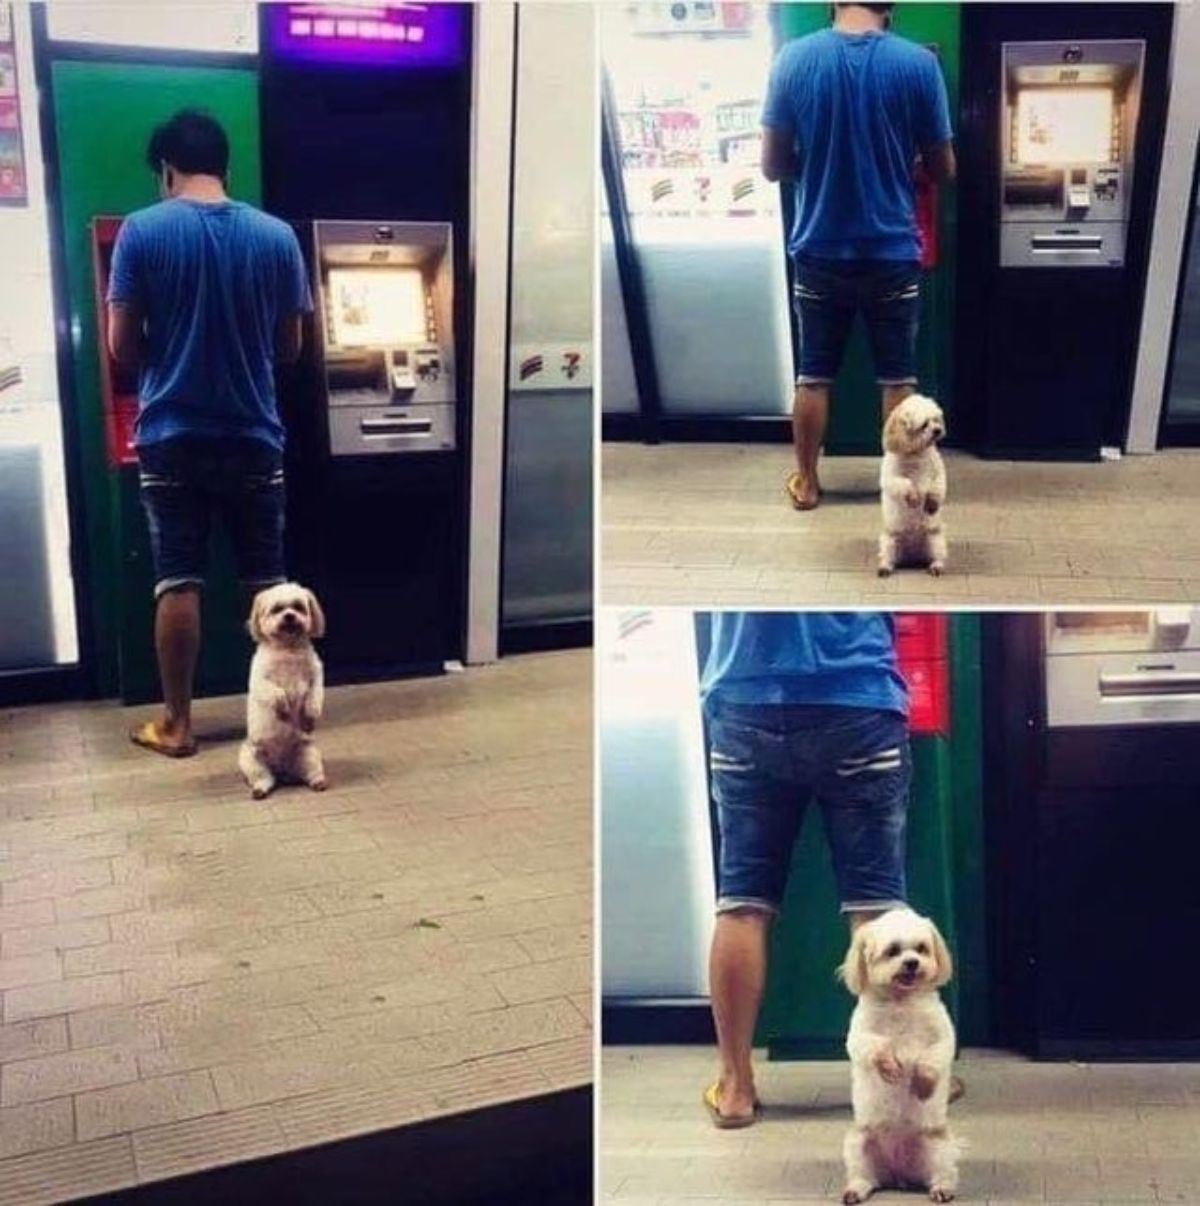 a small fluffy dog standing on hind legs in fron of man at a green and black atm